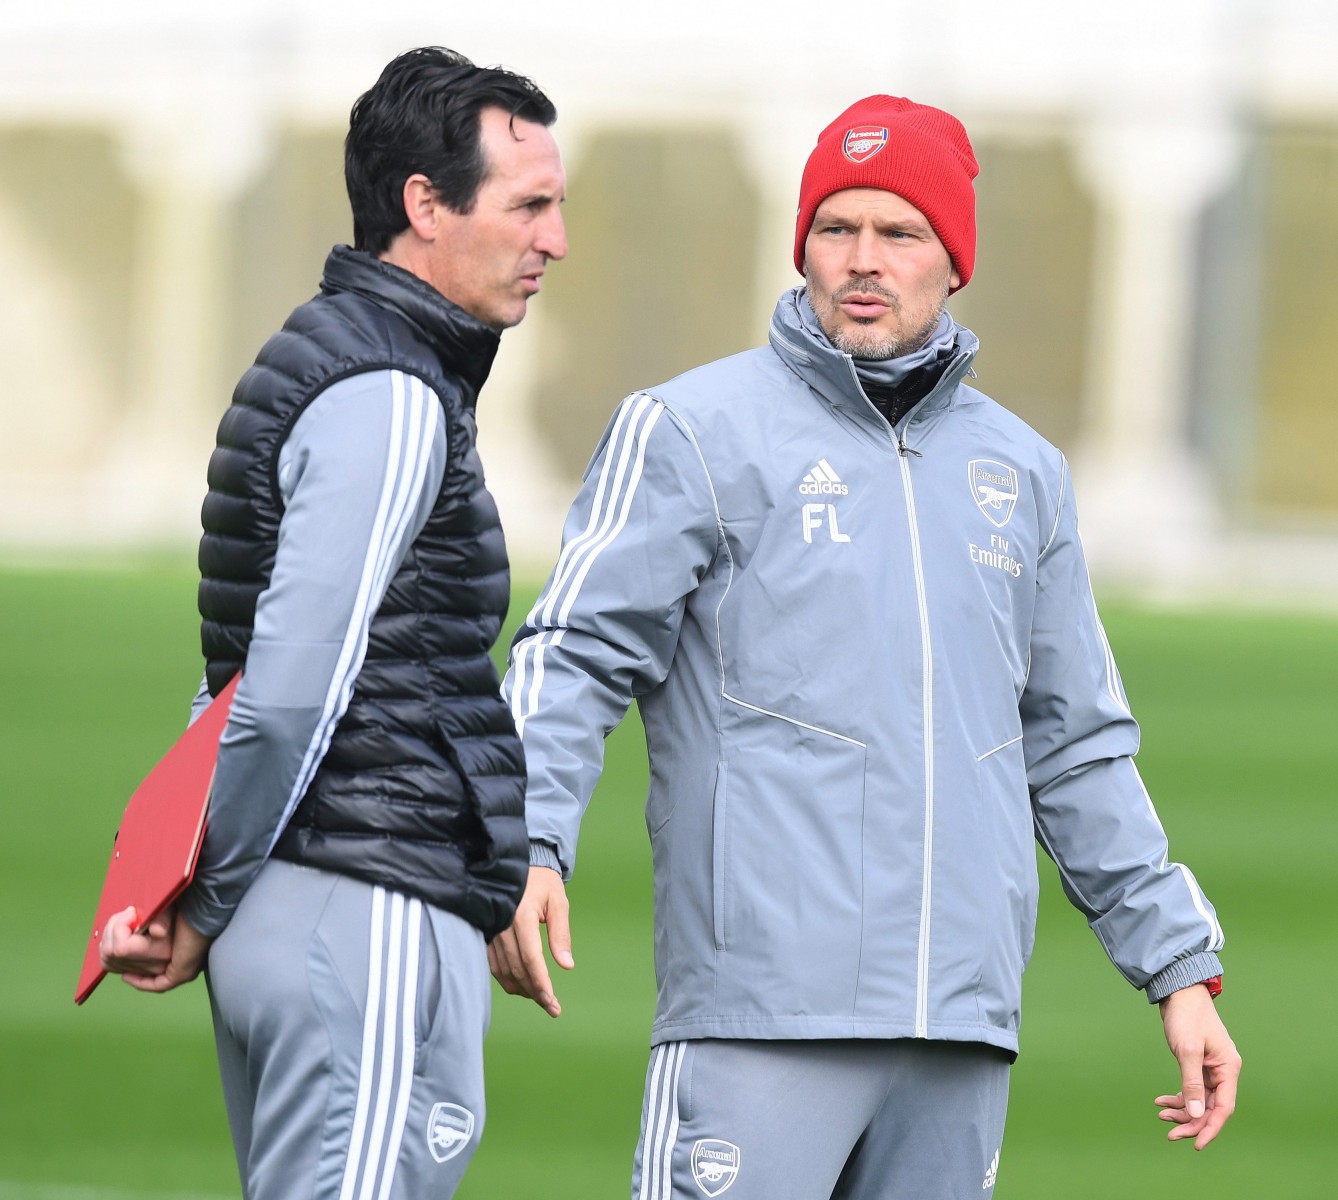 Freddie Ljungberg has been earning his stripes as a coach at Arsenal, working his way up from the academy to first-team level